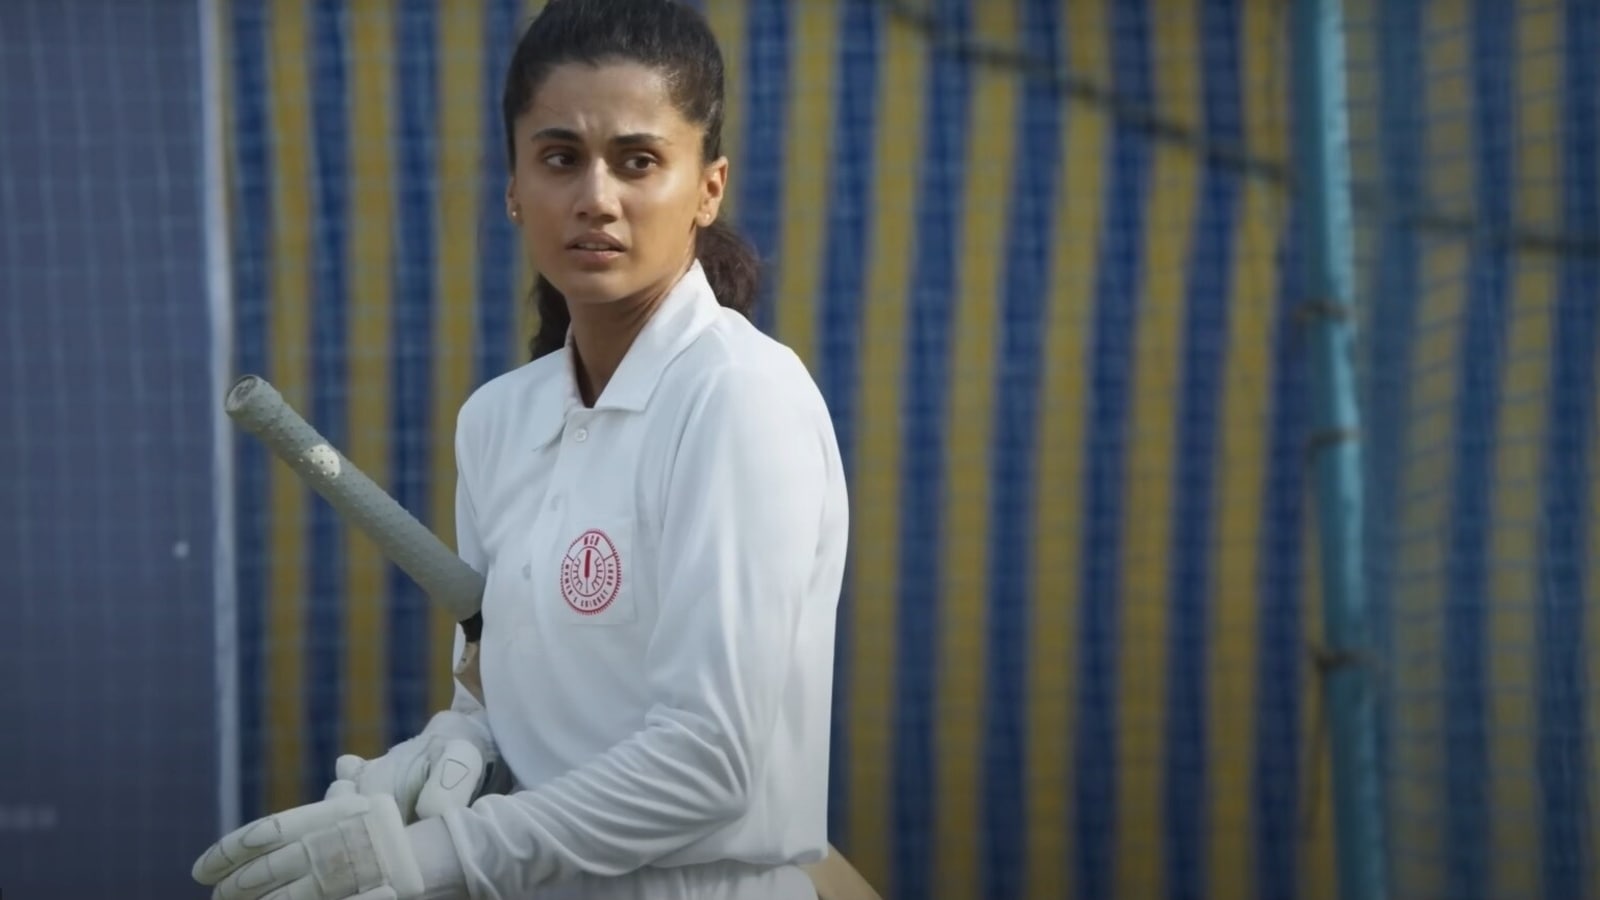 Taapsee Pannu says she found out about women’s cricket team in 2017: ‘I am embarrassed about it’